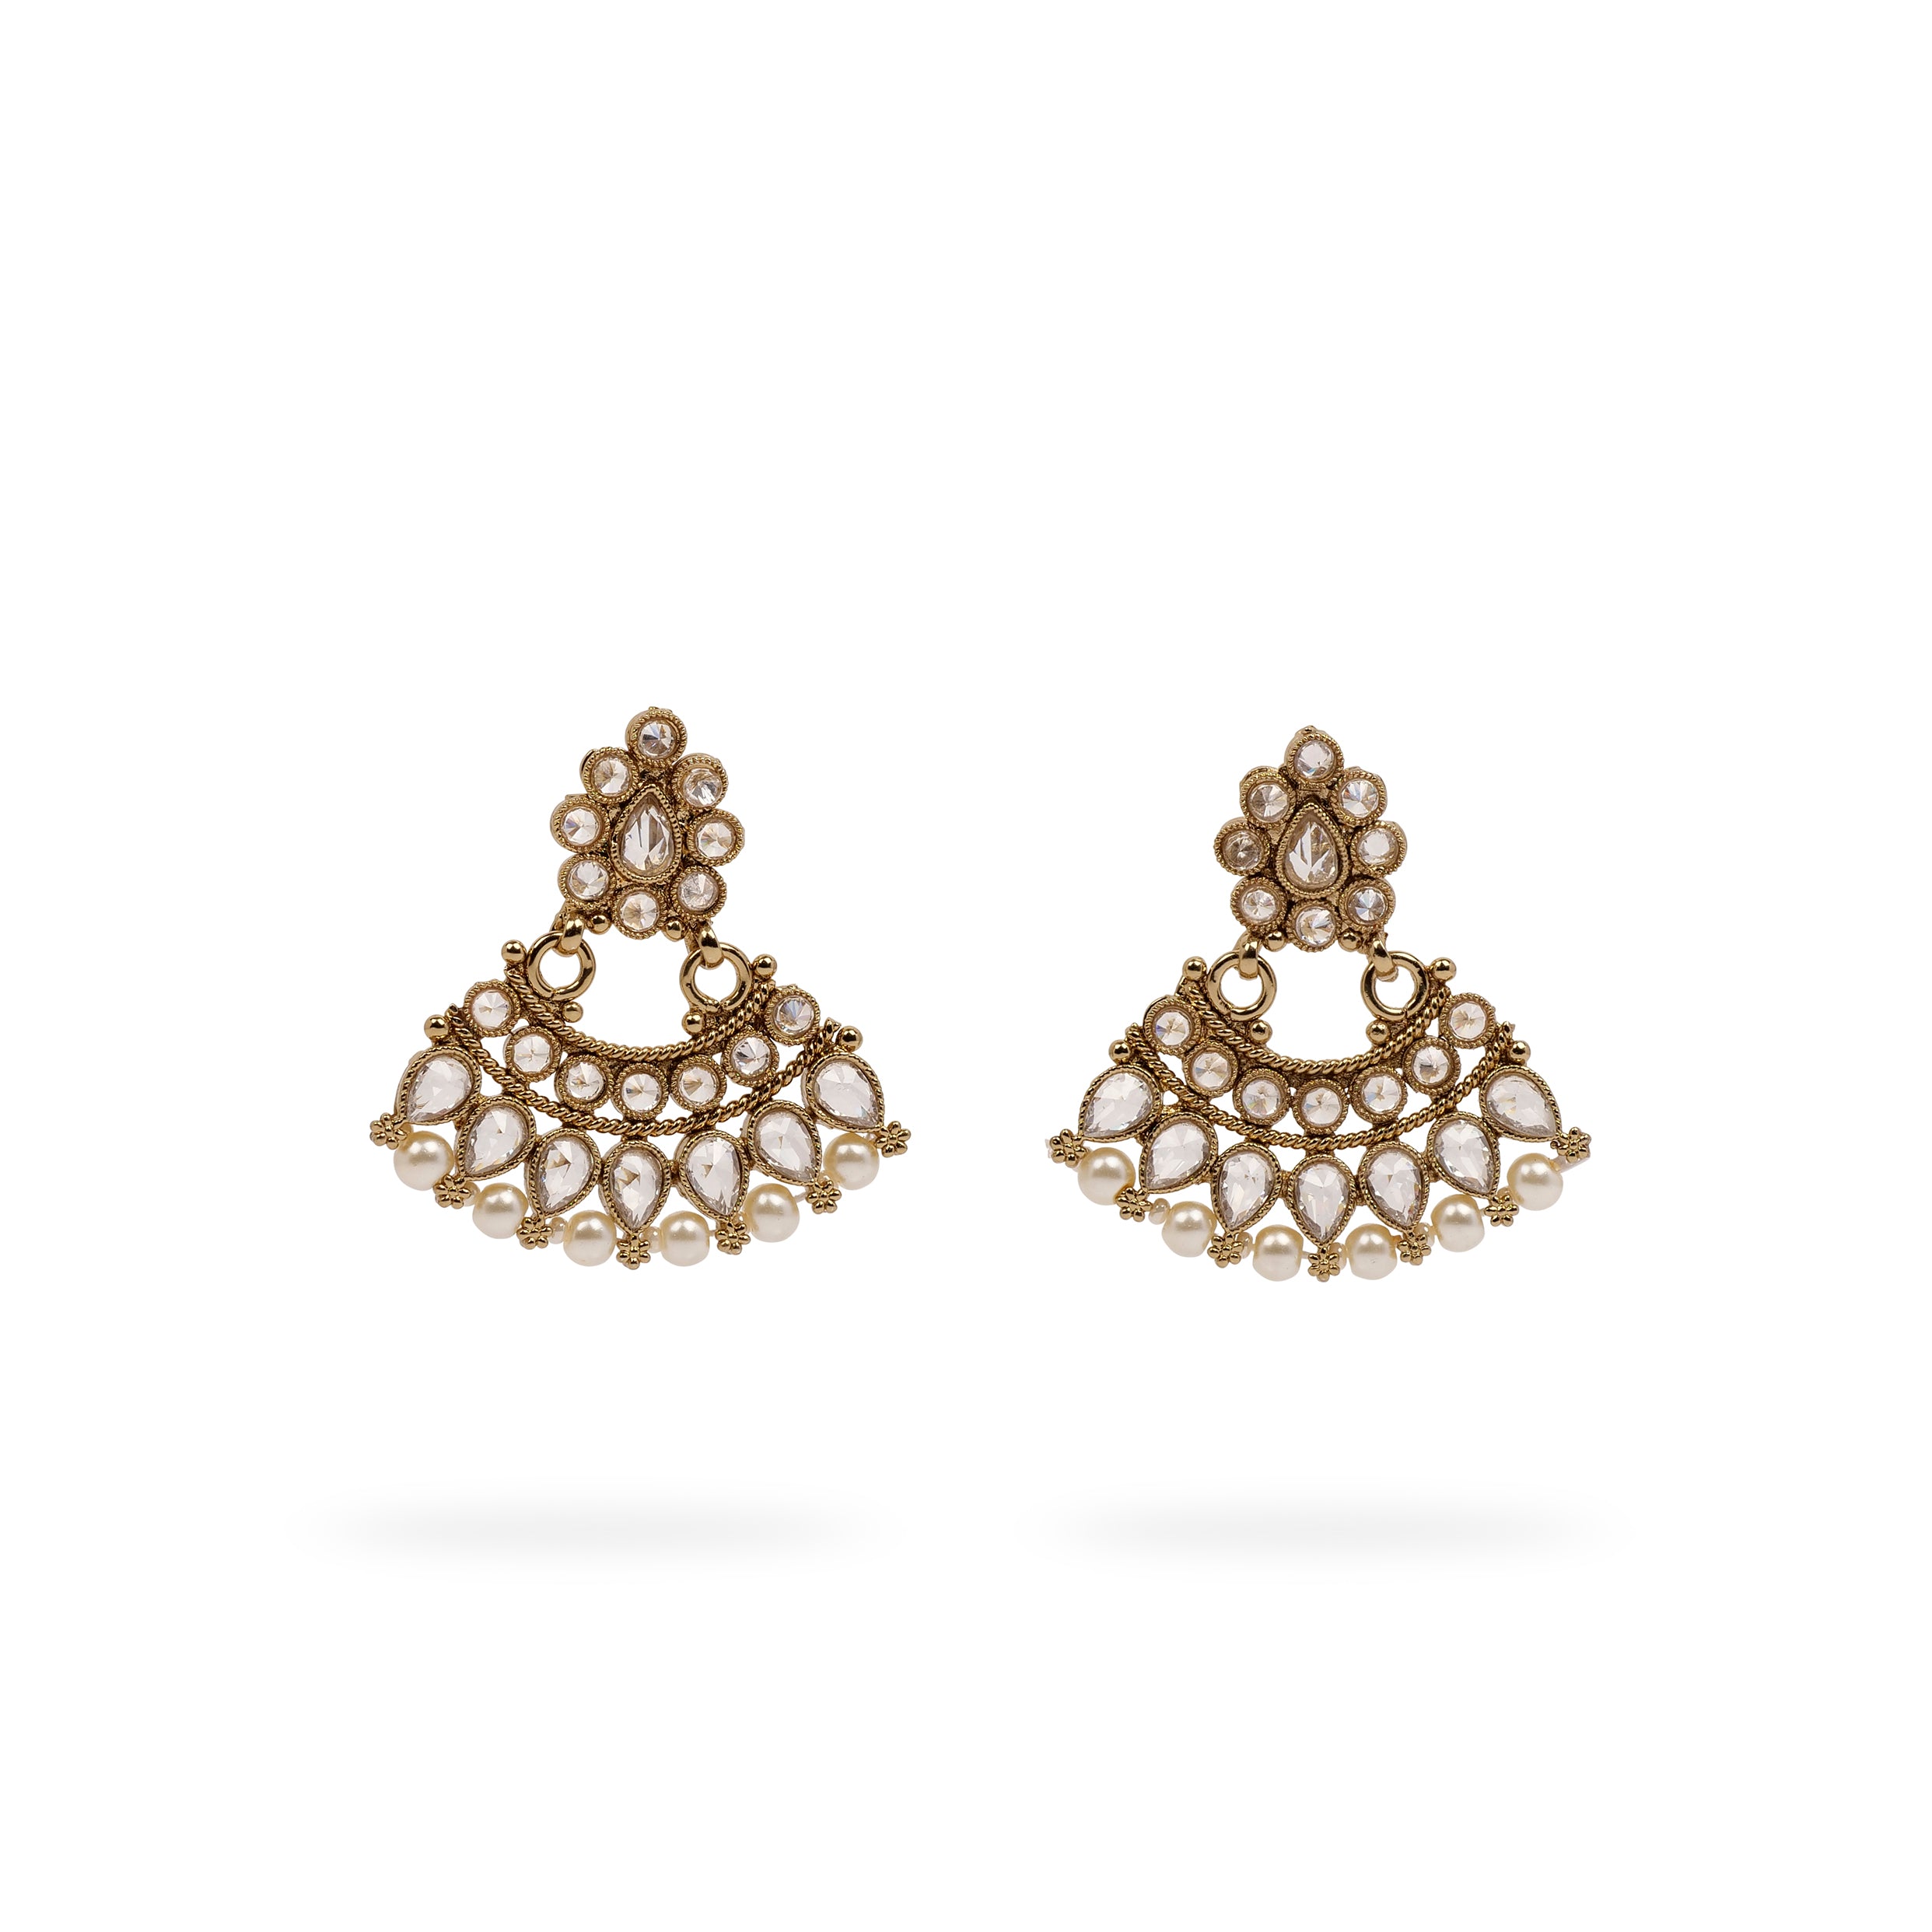 Anala Small Chandbali Earrings in White and Antique Gold